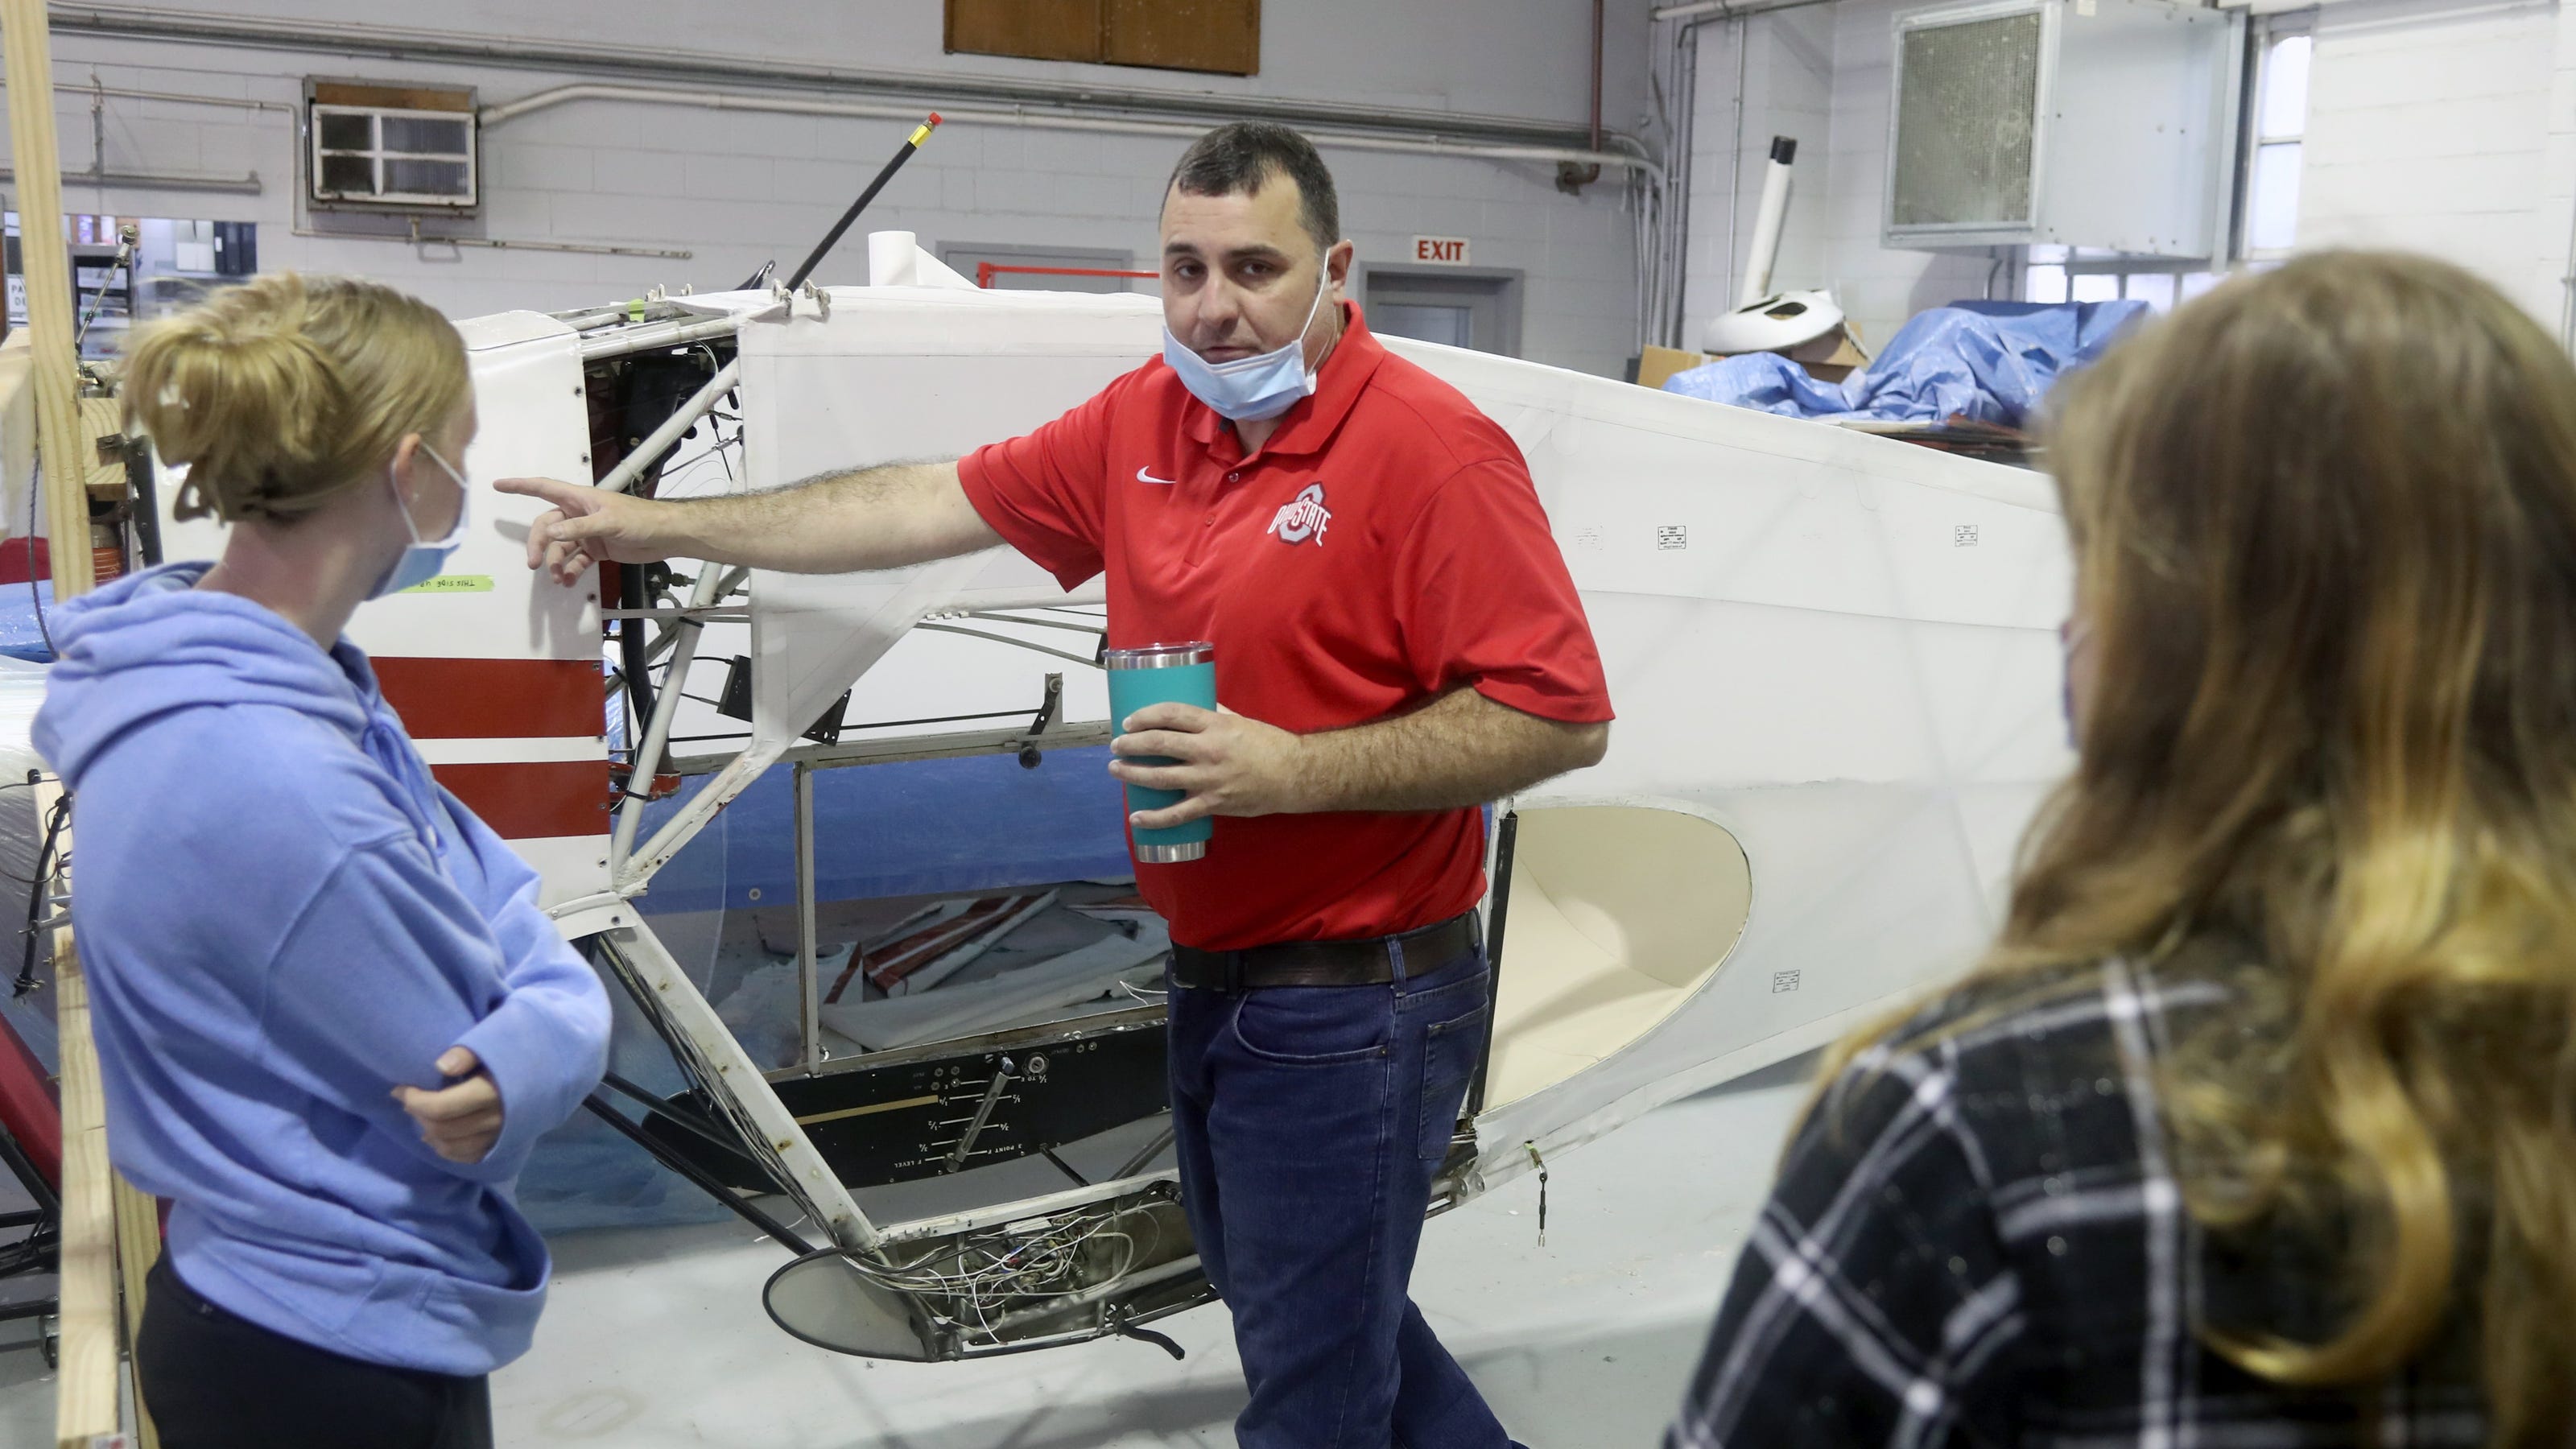 Ohio State University Airport's Taxi to Takeoff helps high schoolers' aviation career aspirations take flight